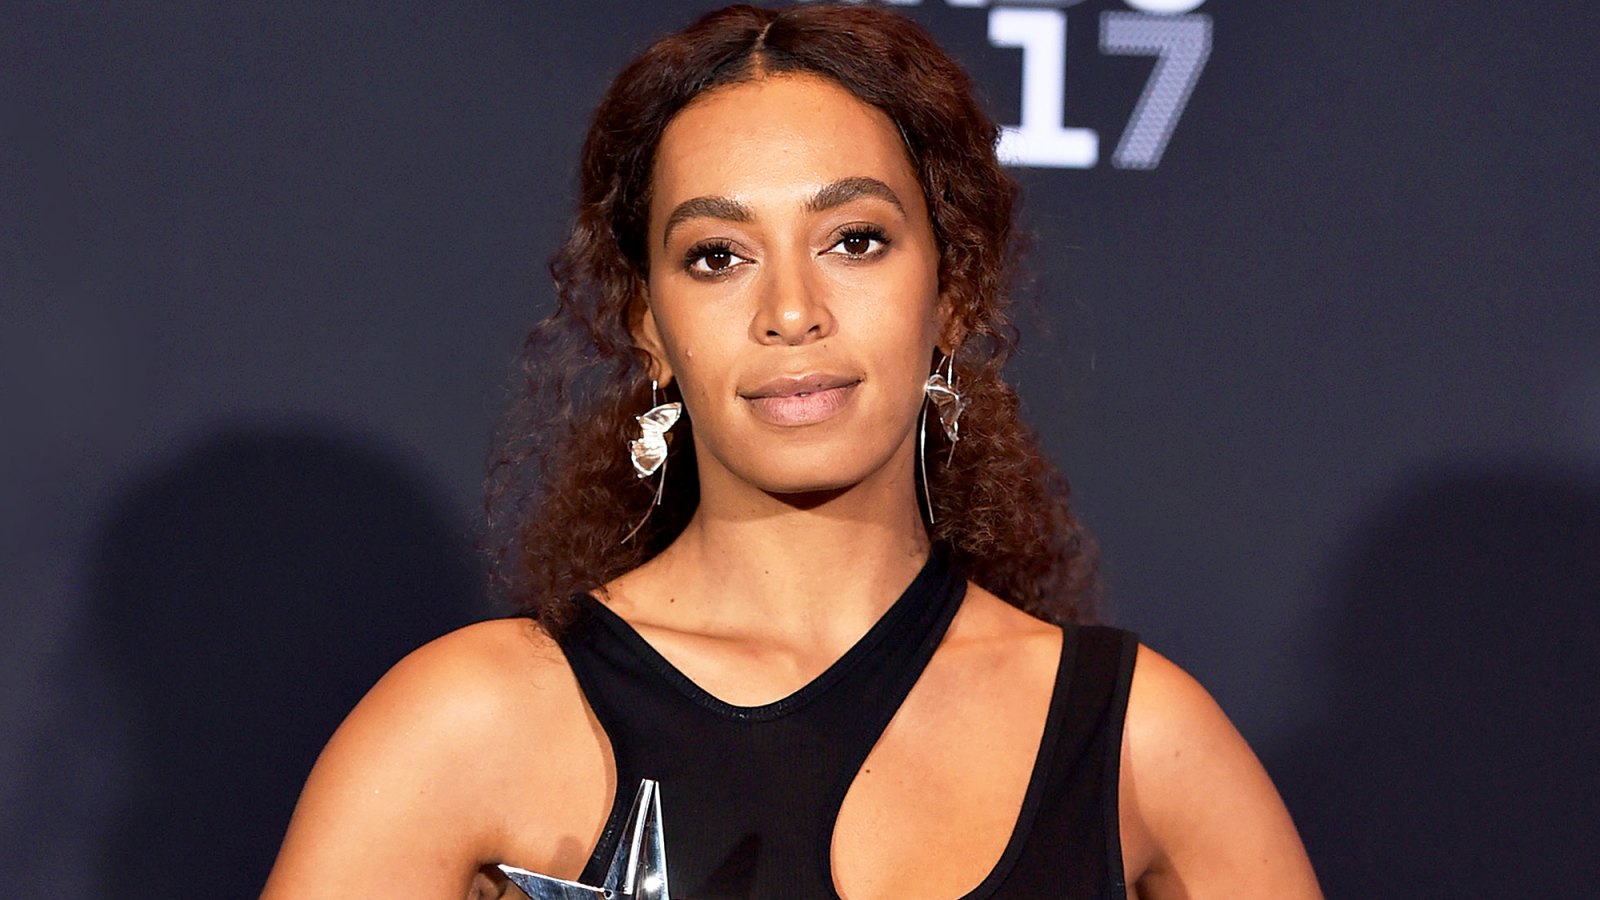 Solange attends the 2017 BET Awards at Microsoft Theater in Los Angeles, California.